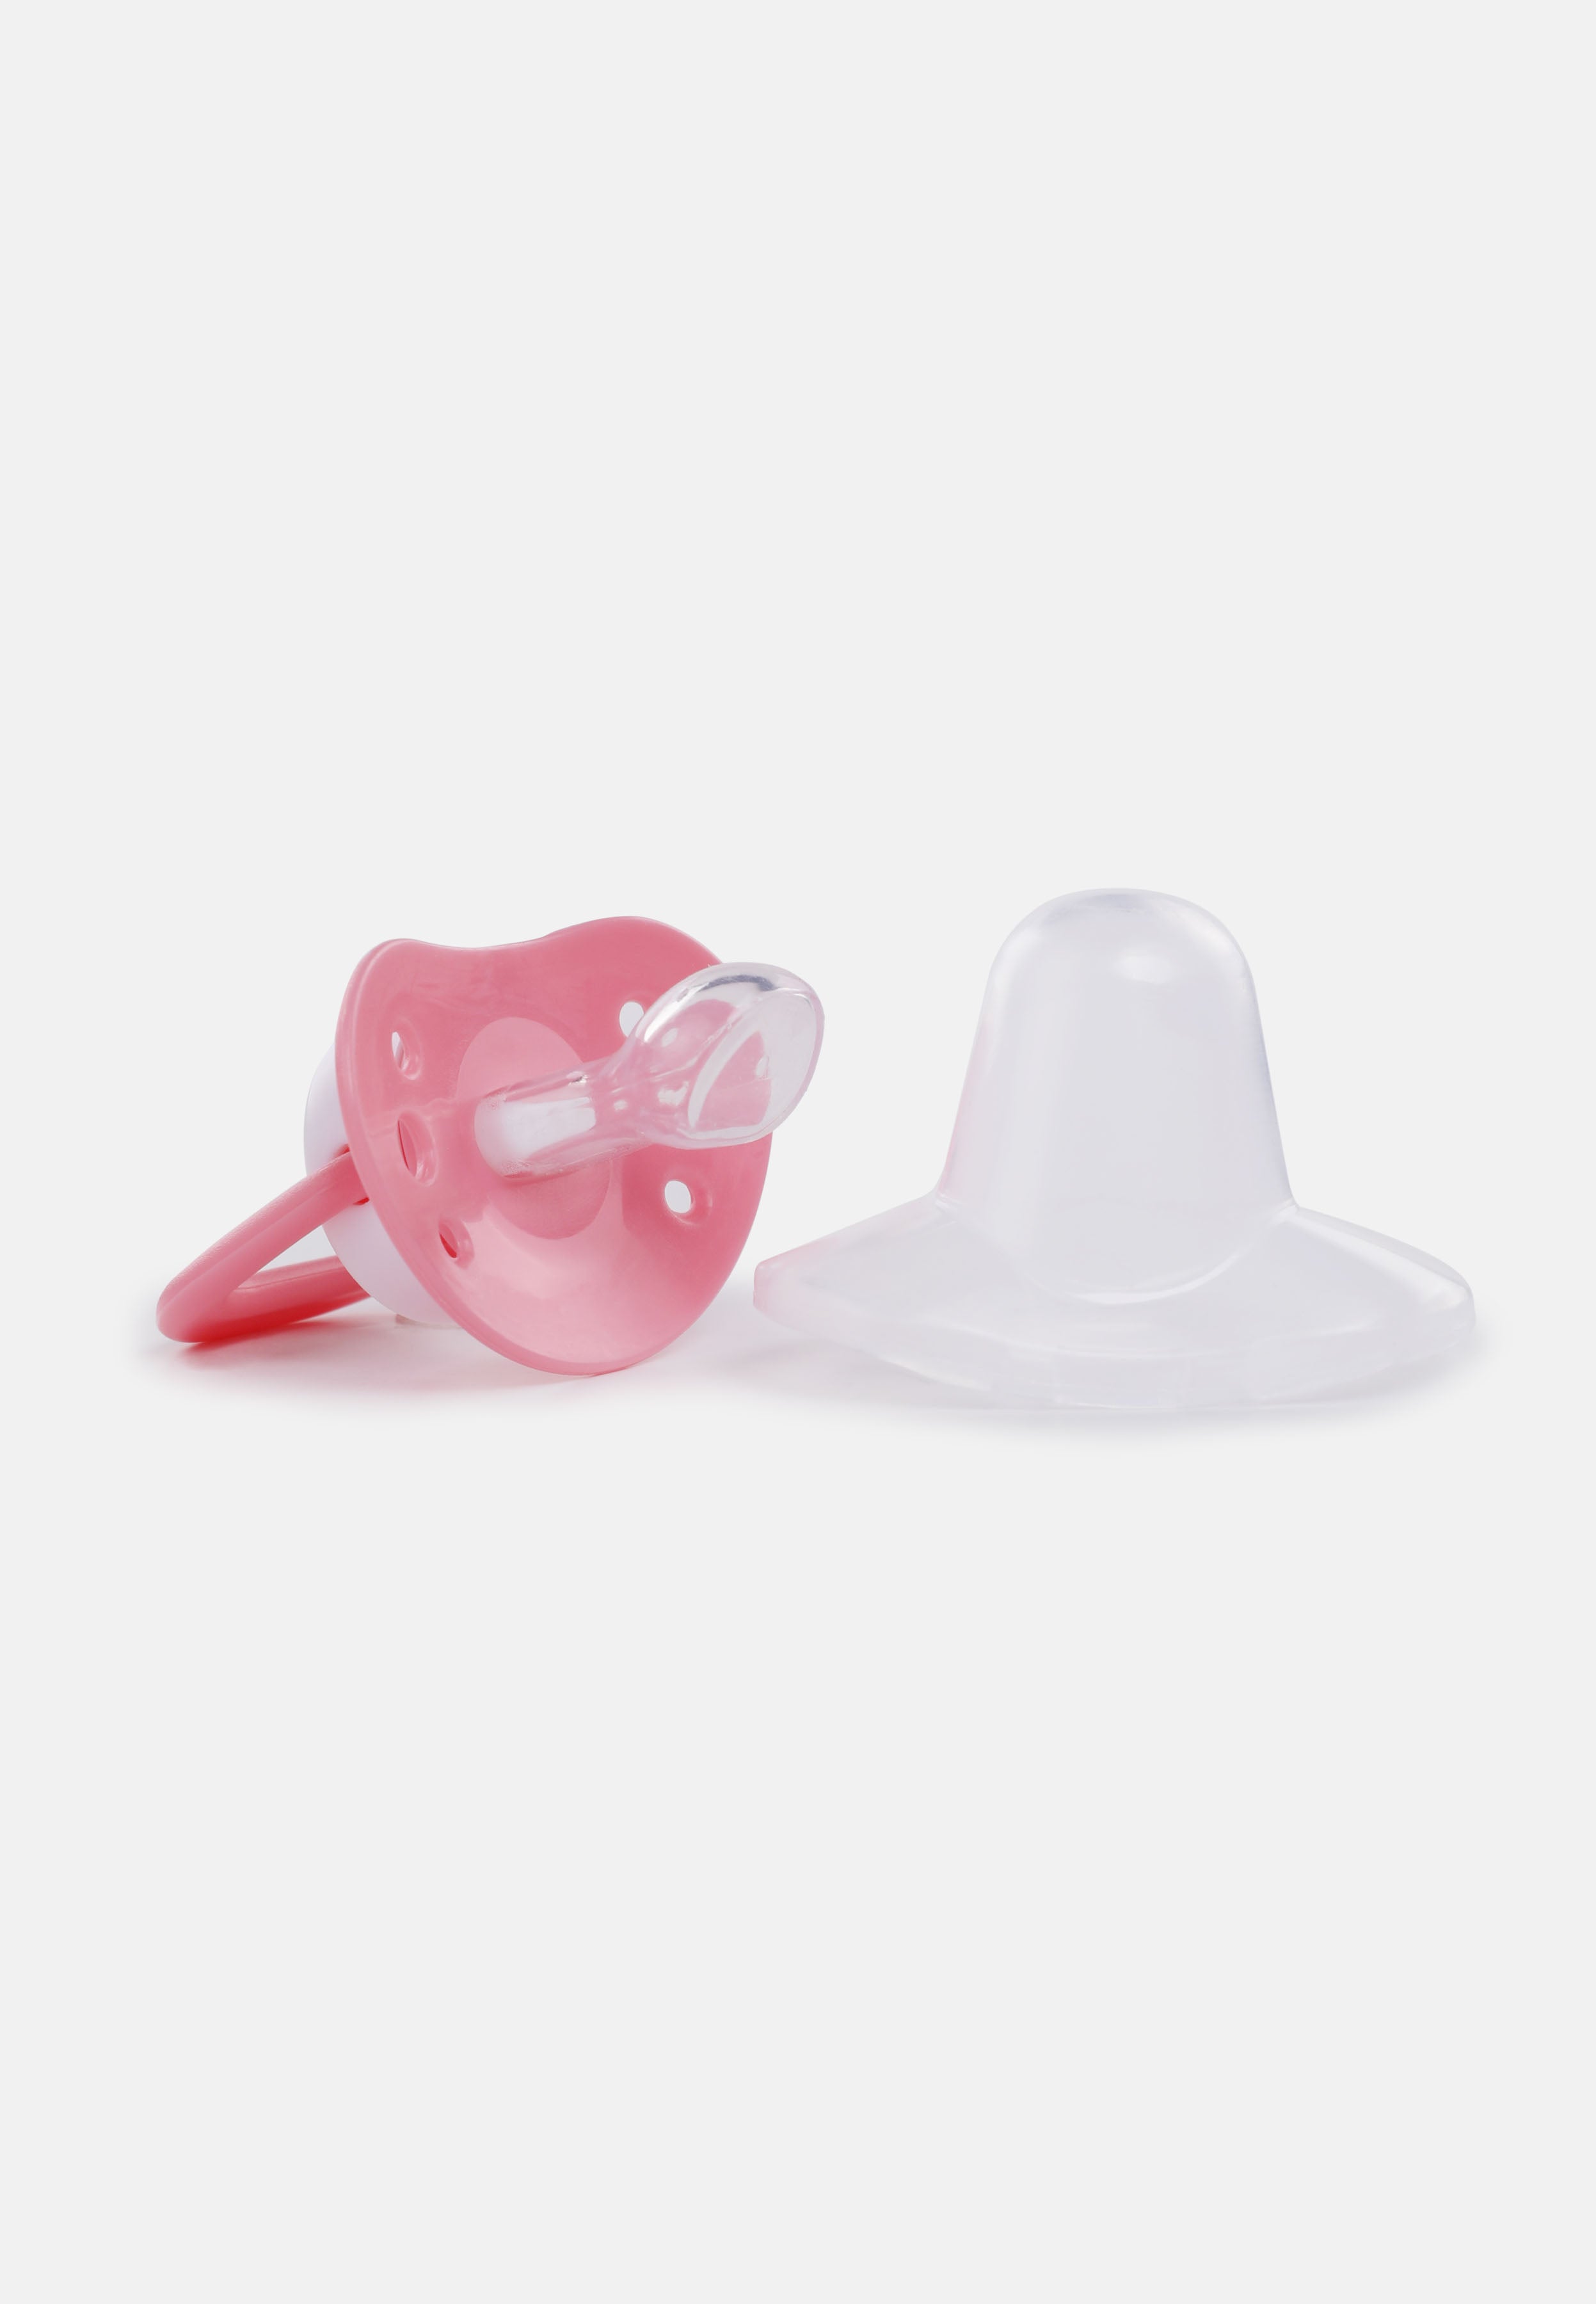 Baby Cheetah Soother with Case (2 IN 1) - Orthodontic Teats (0-6M) - CBB-ST21086